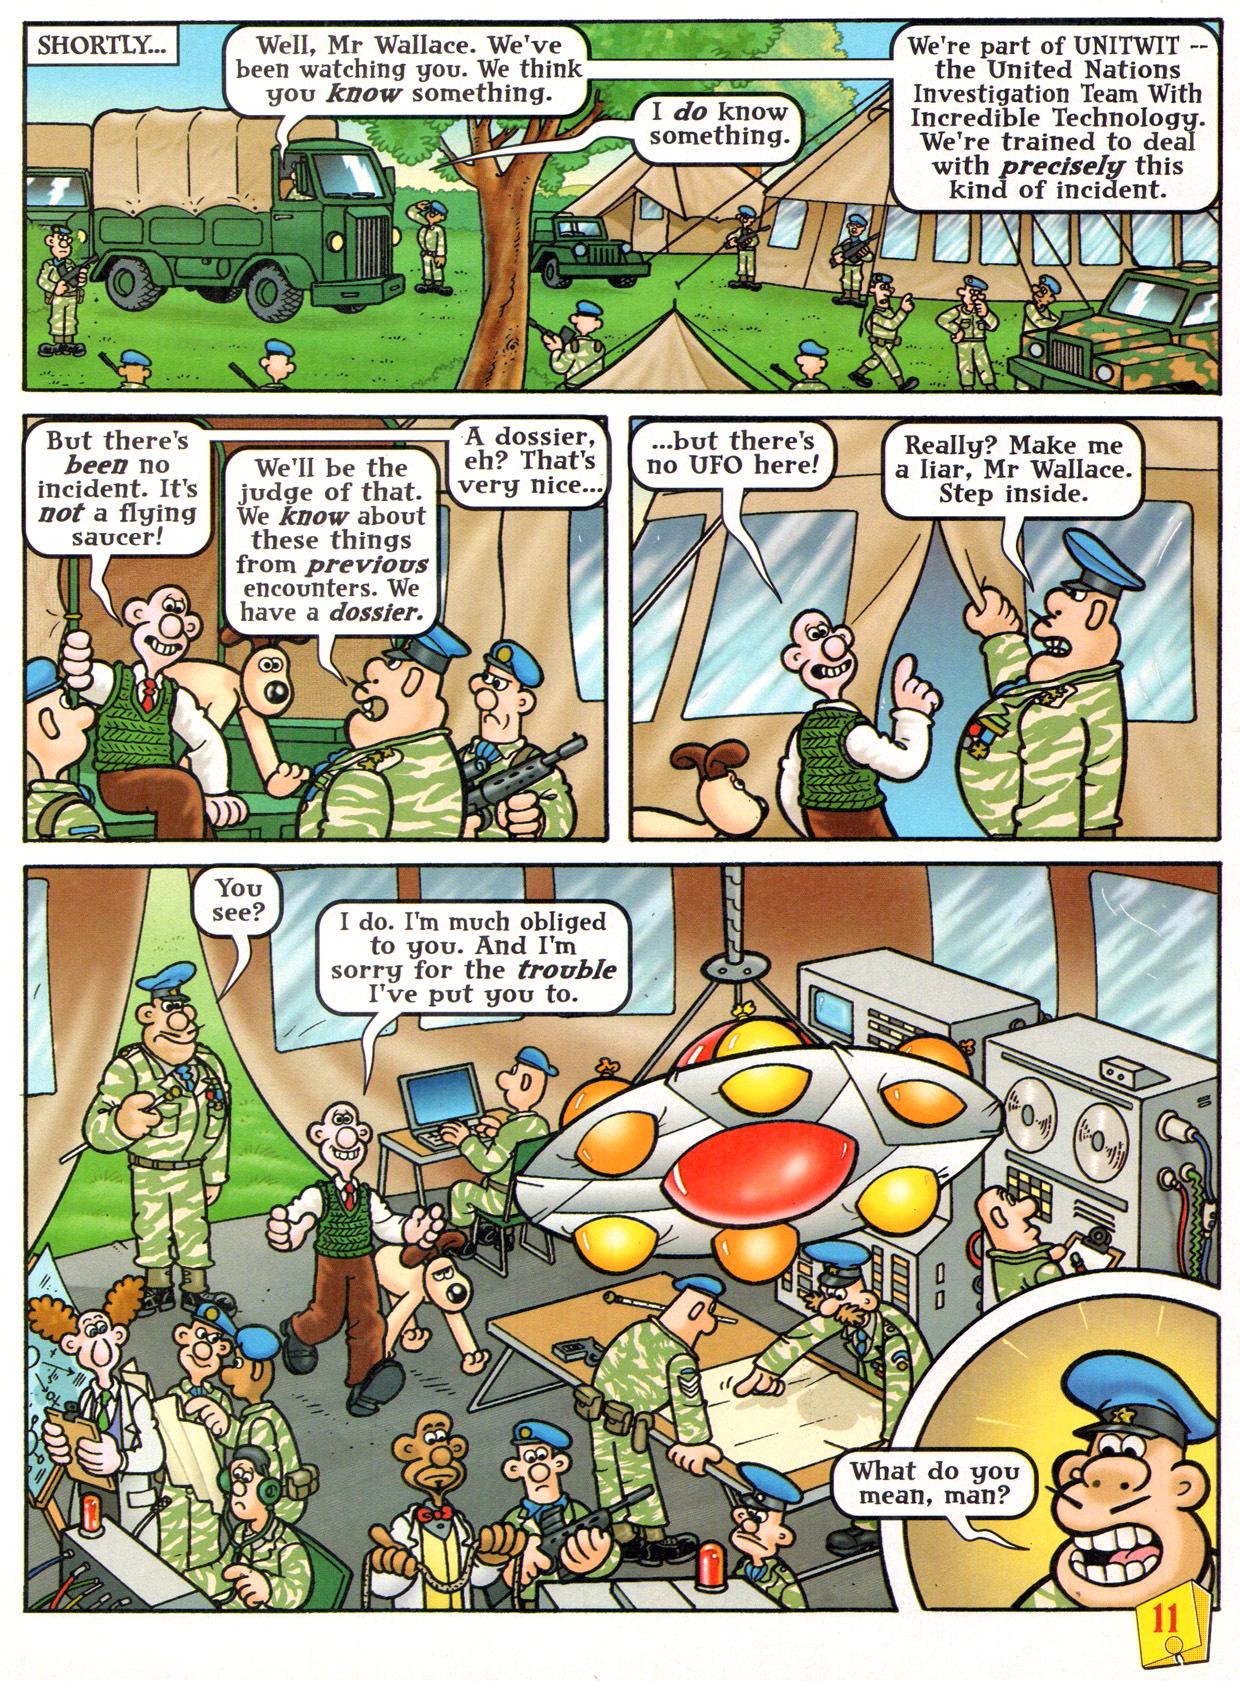 Read online Wallace & Gromit Comic comic -  Issue #10 - 11